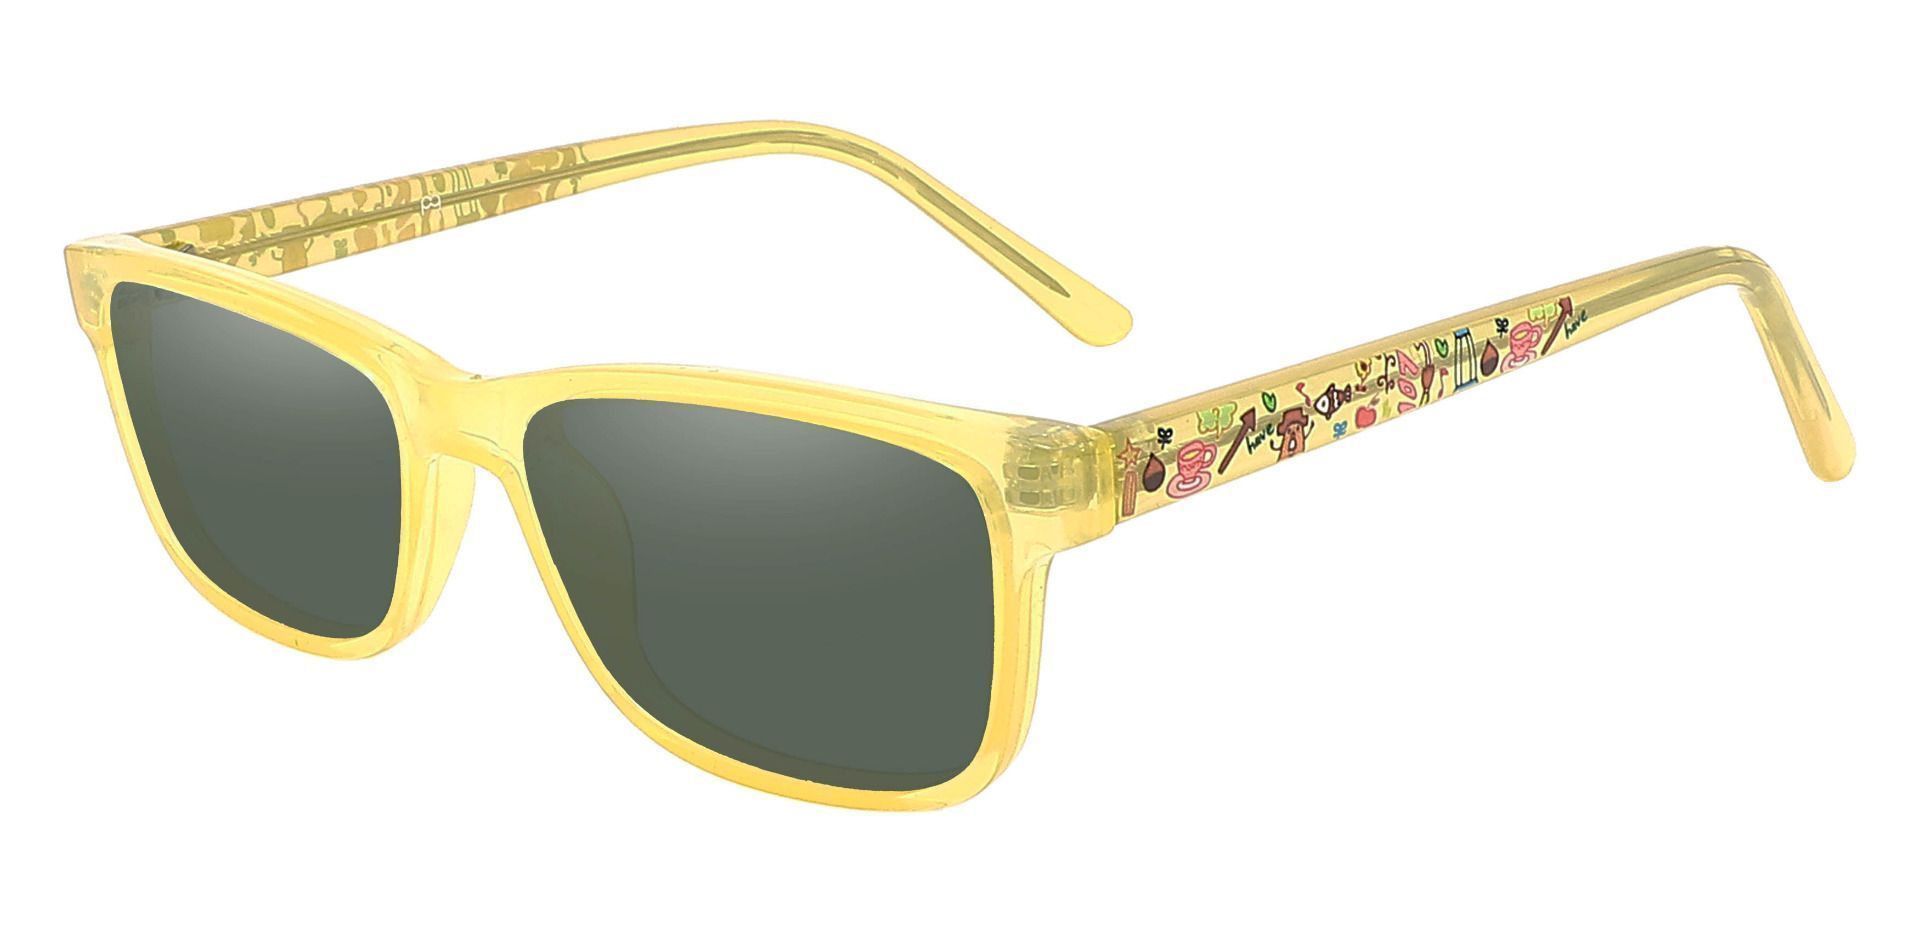 Cory Rectangle Prescription Sunglasses - Yellow Frame With Green Lenses